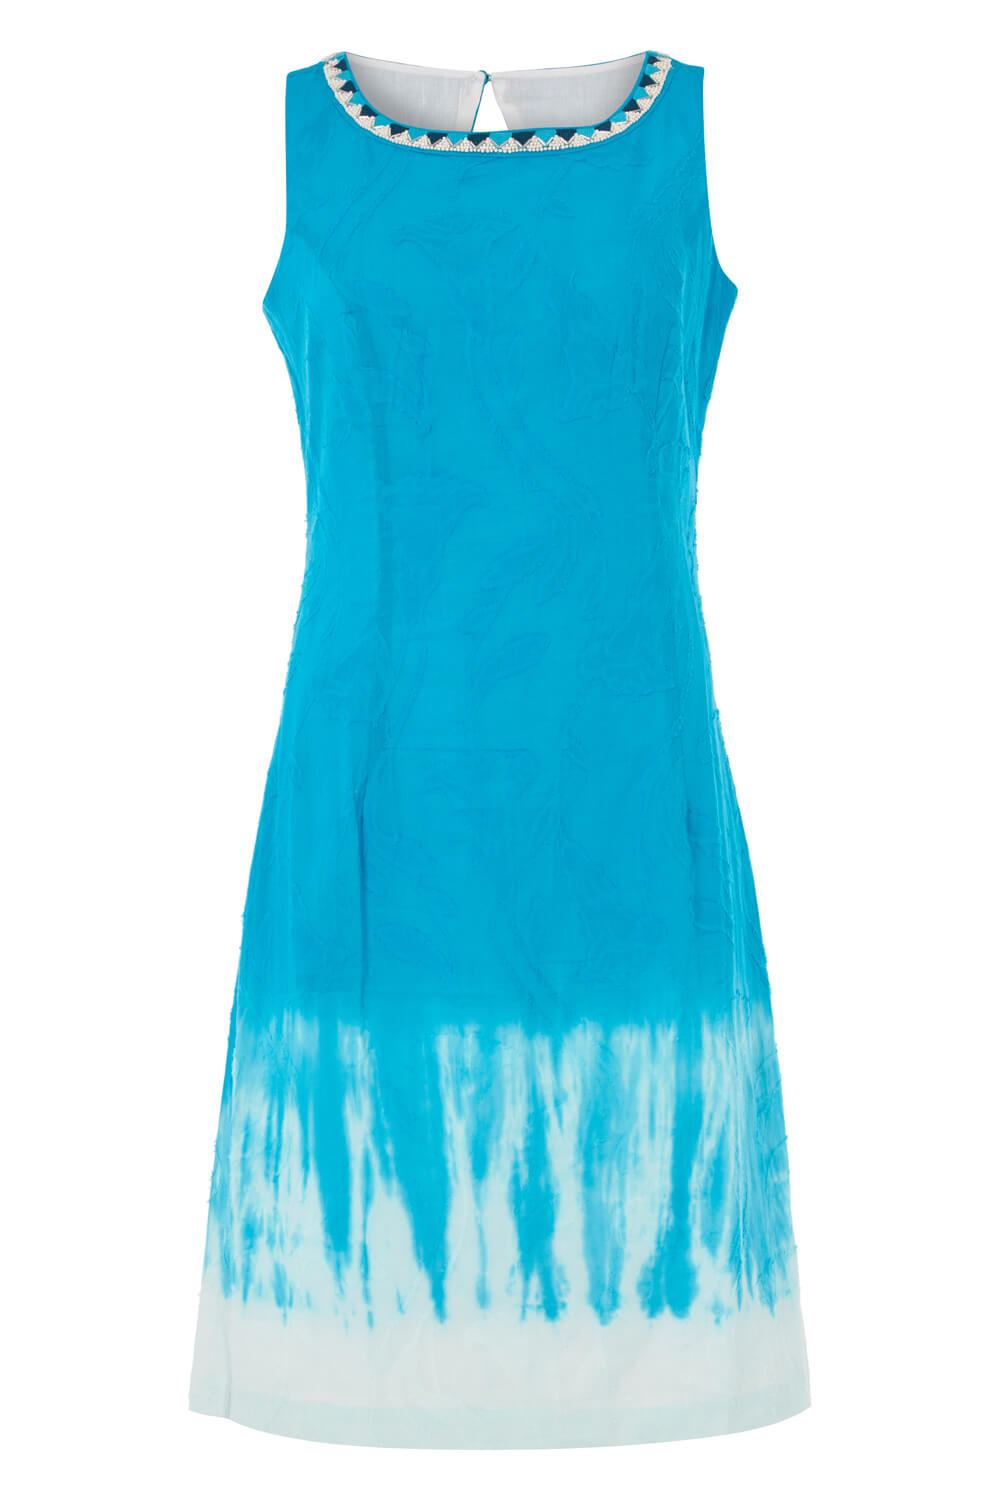 Turquoise Embroidered Tie Dye Cotton Shift Dress, Image 5 of 5